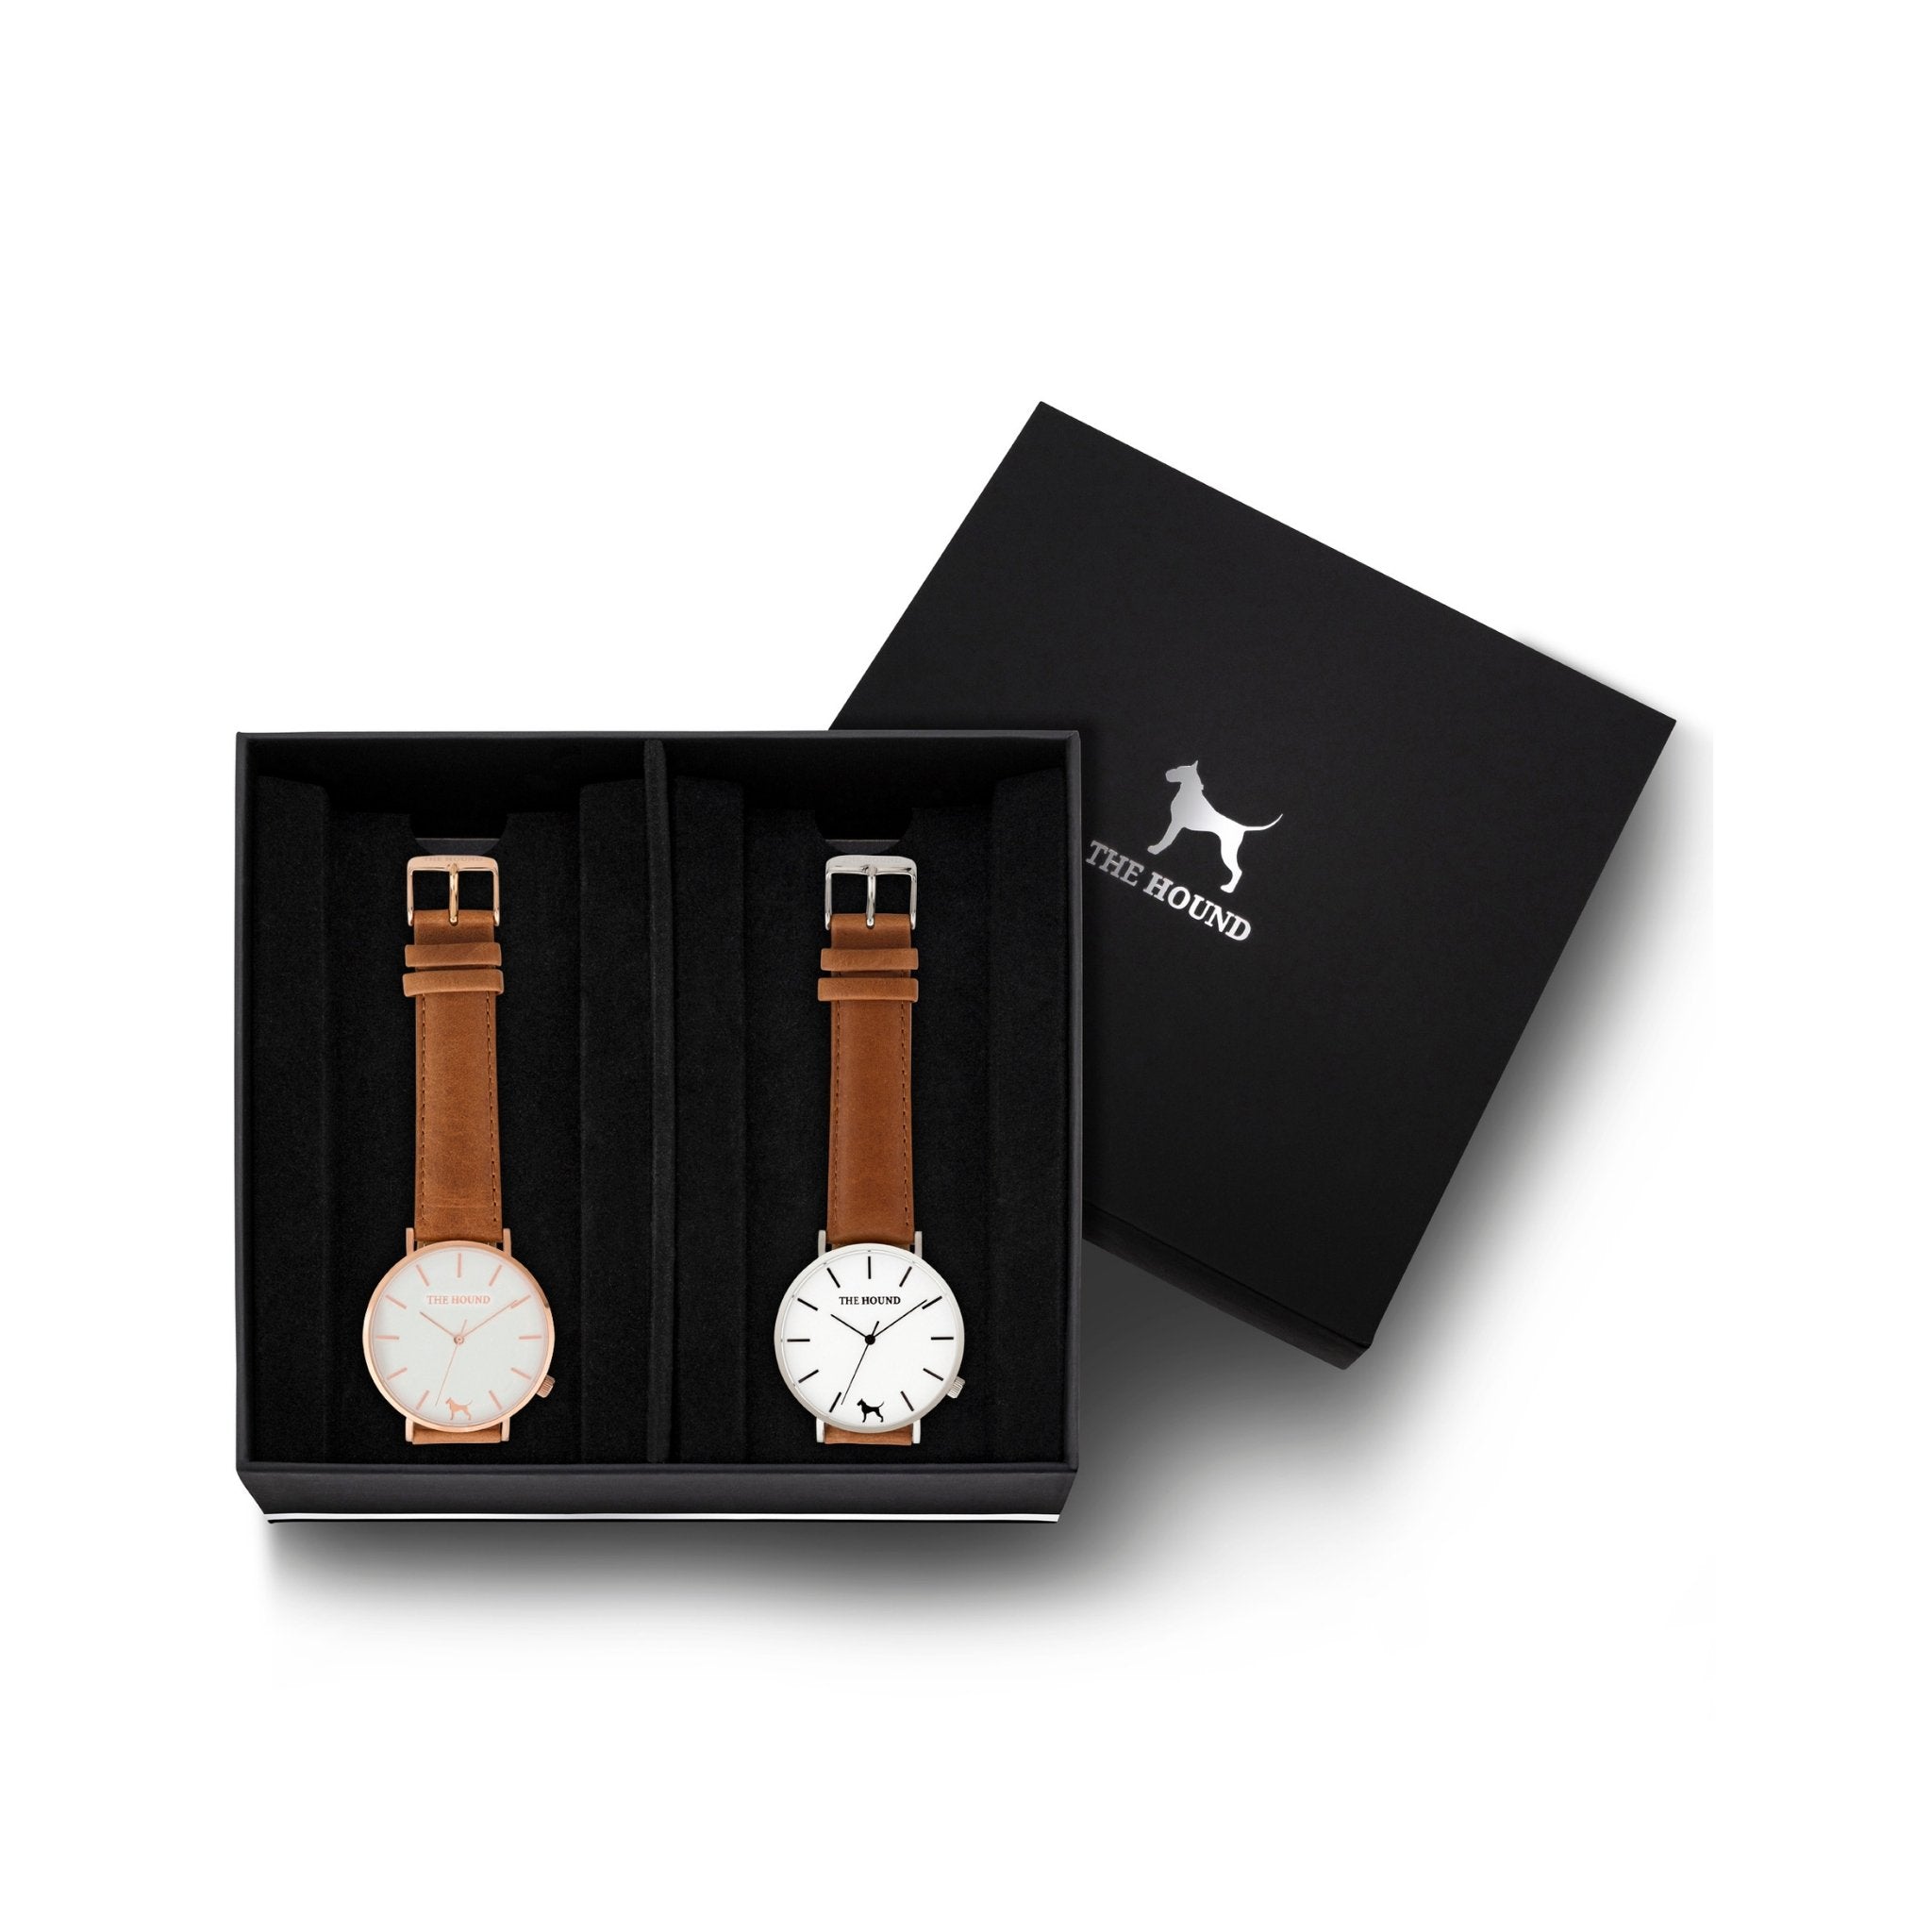 Custom gift set - Rose gold and white watch with stitched tan genuine leather band and a silver and white watch with stitched tan genuine leather band